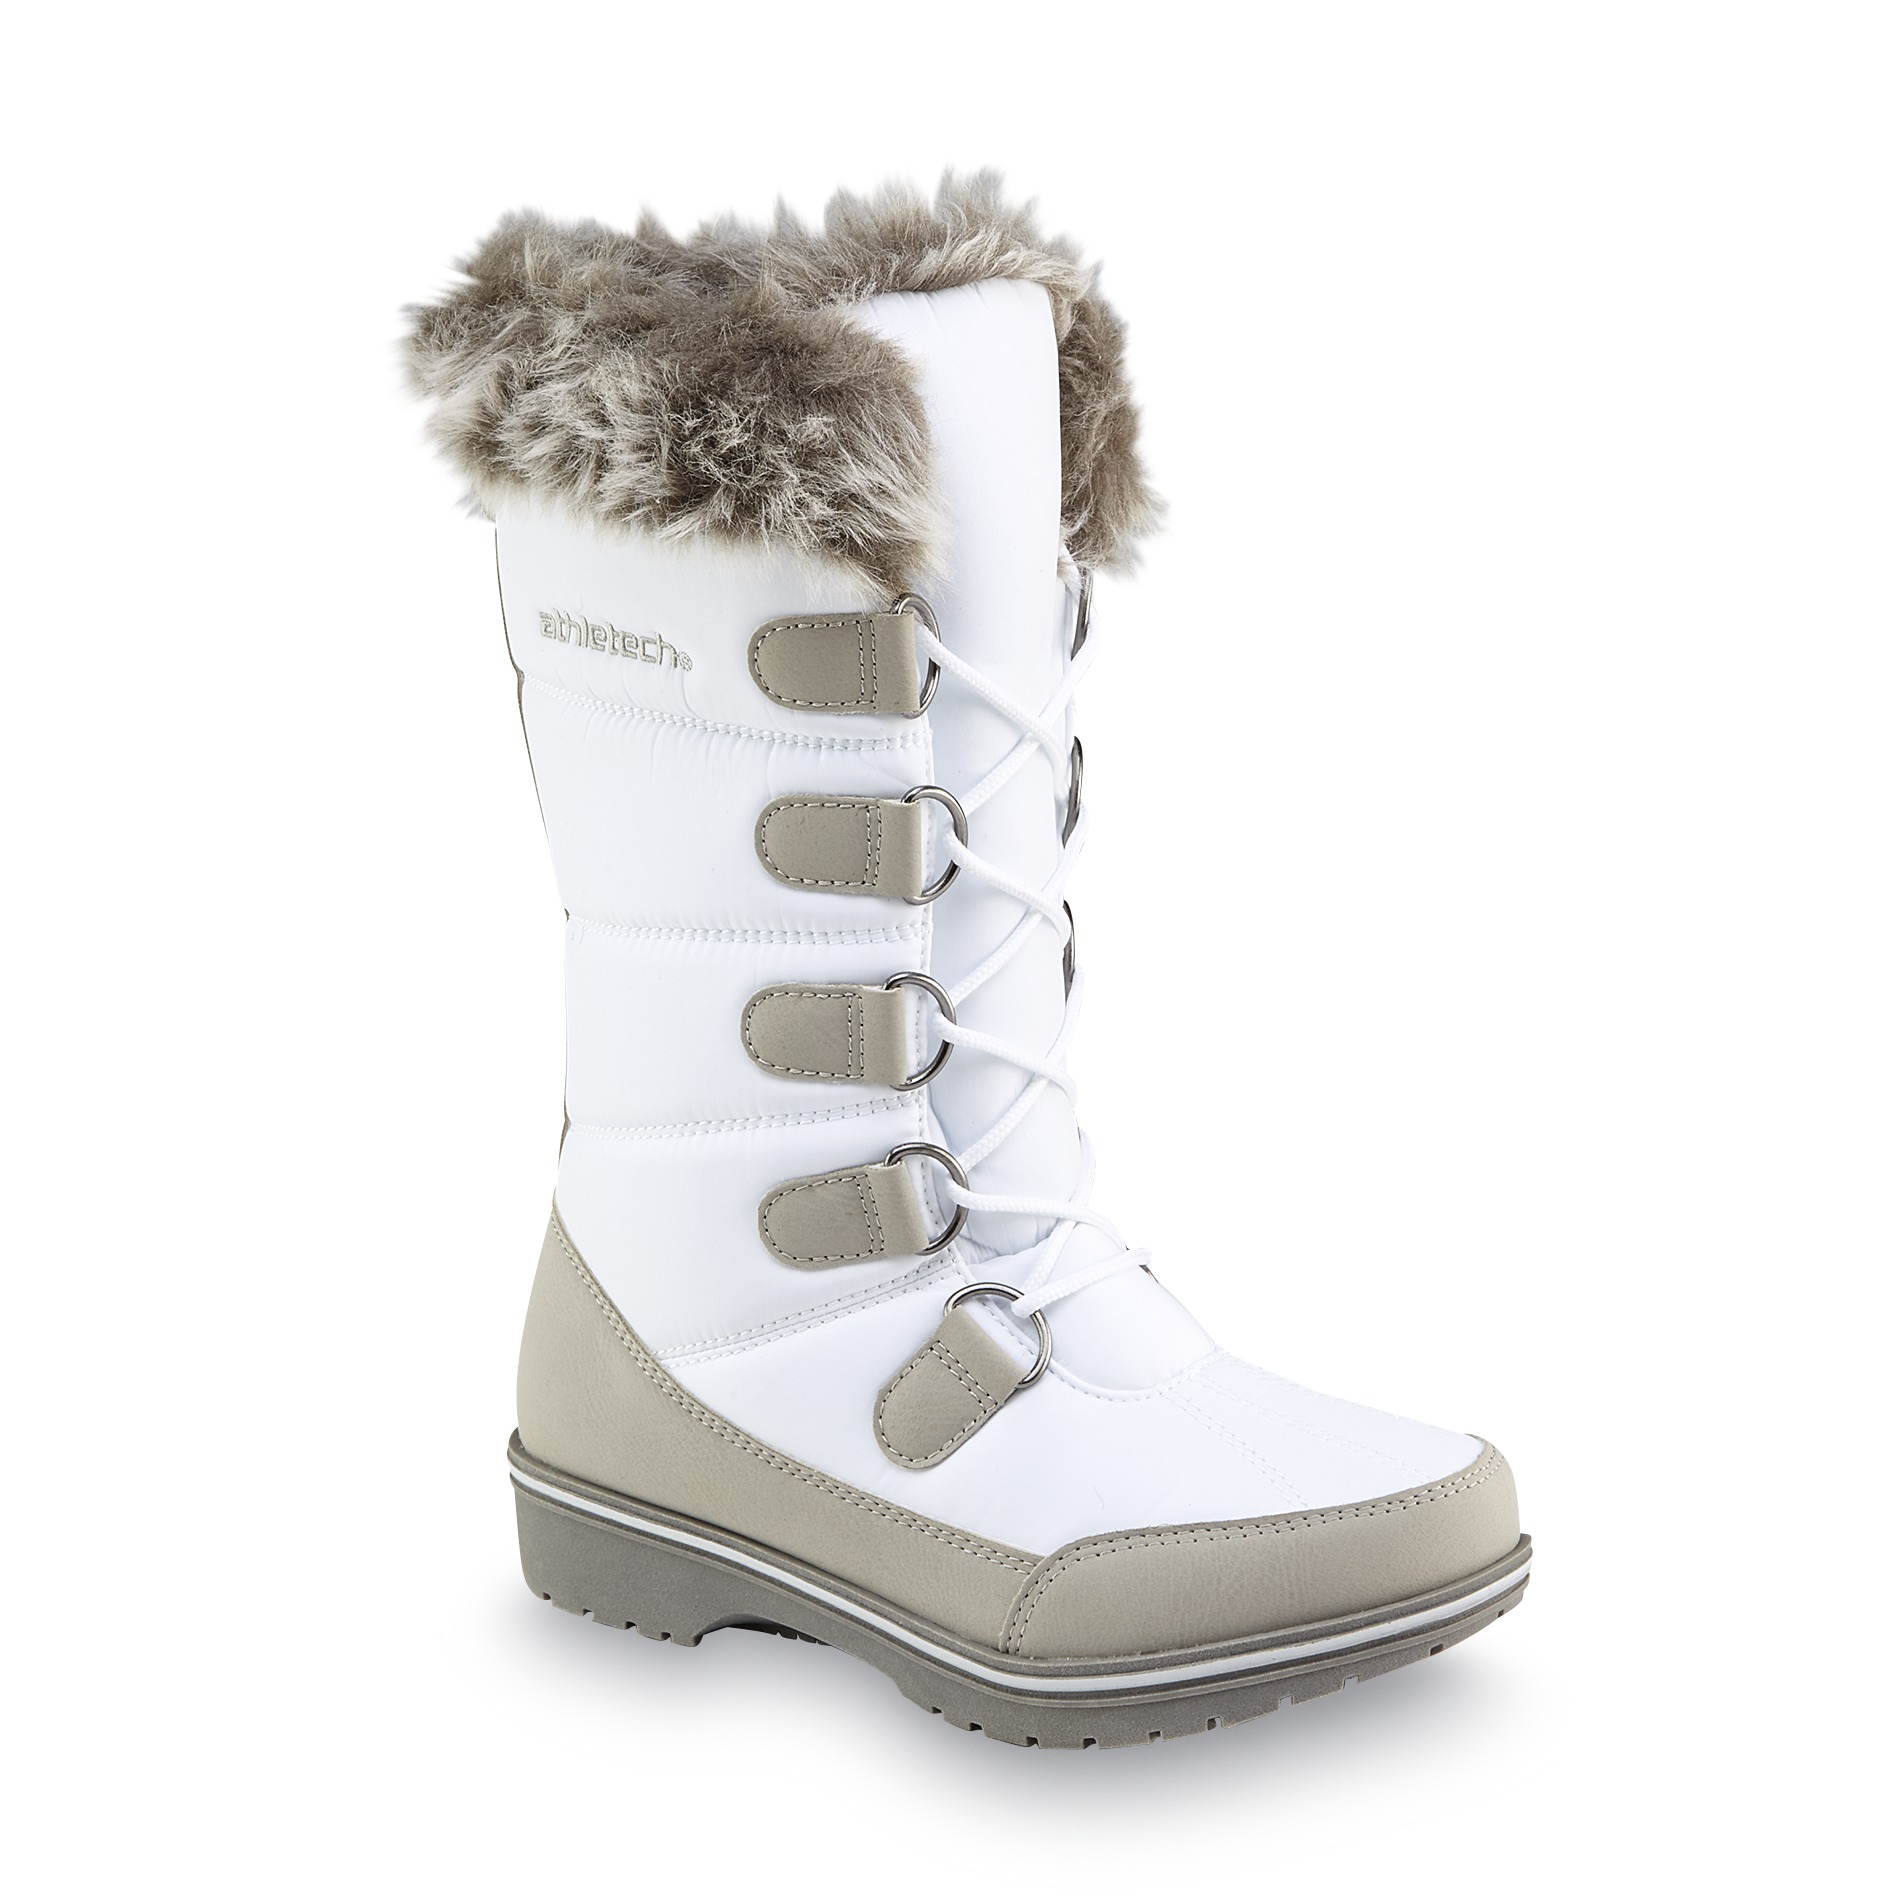 Womens White Snow Boots 5iHf4WVp